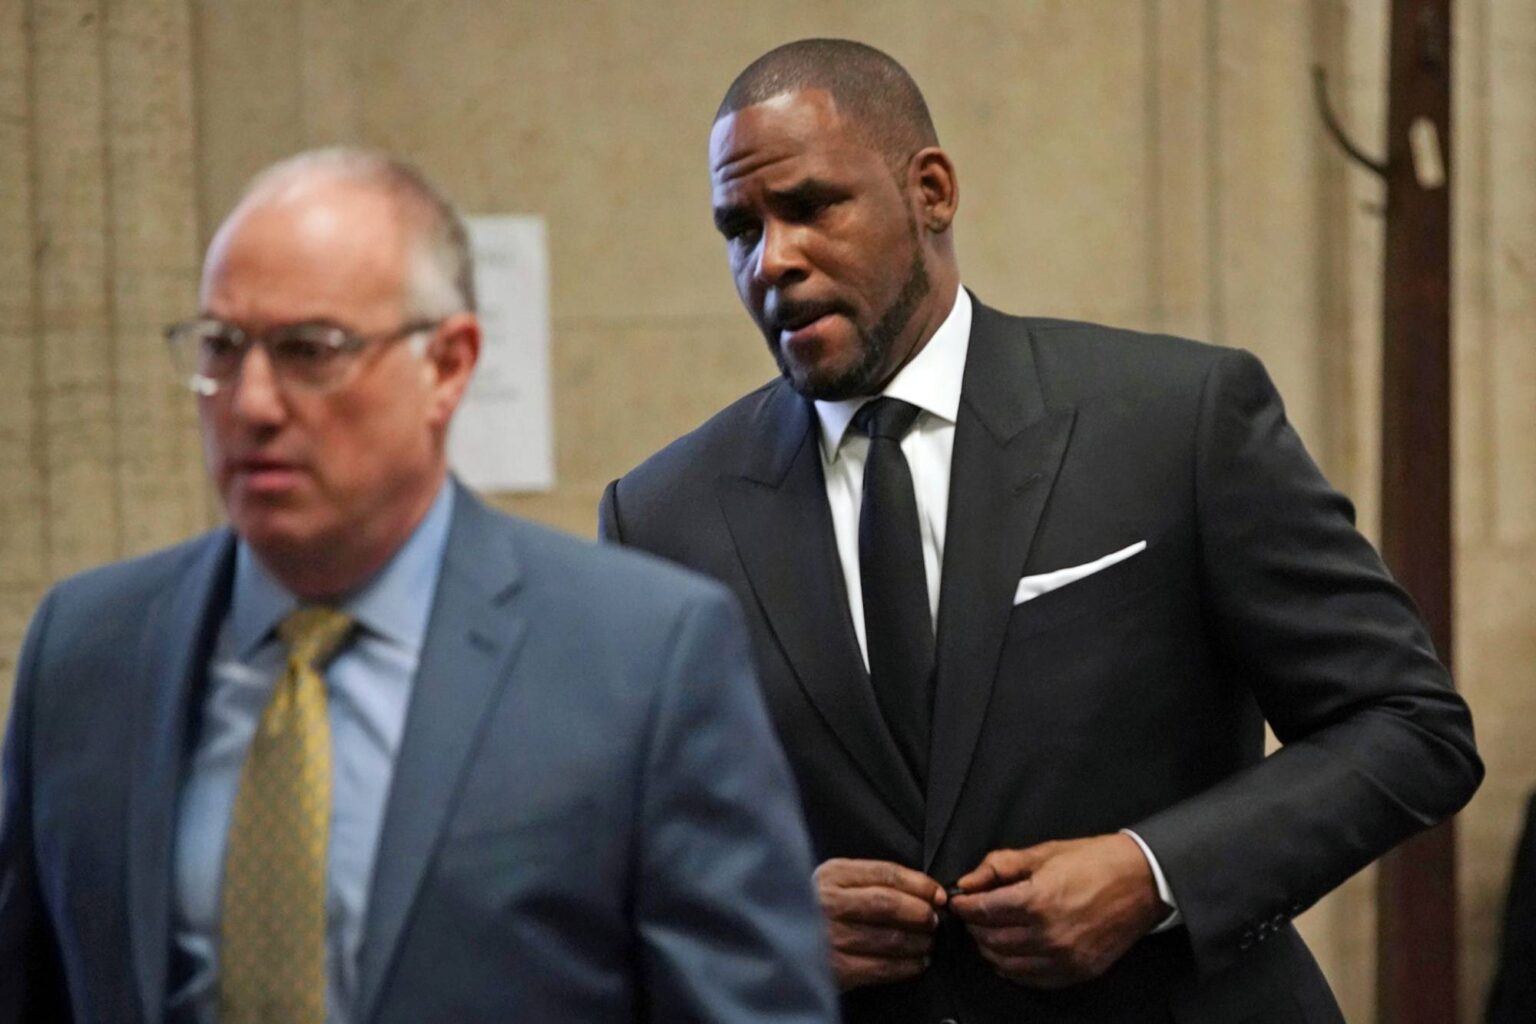 R. Kelly’s legal team had requested he be released so he could “properly” prepare for his upcoming case. Here's the latest update on R. Kelly.